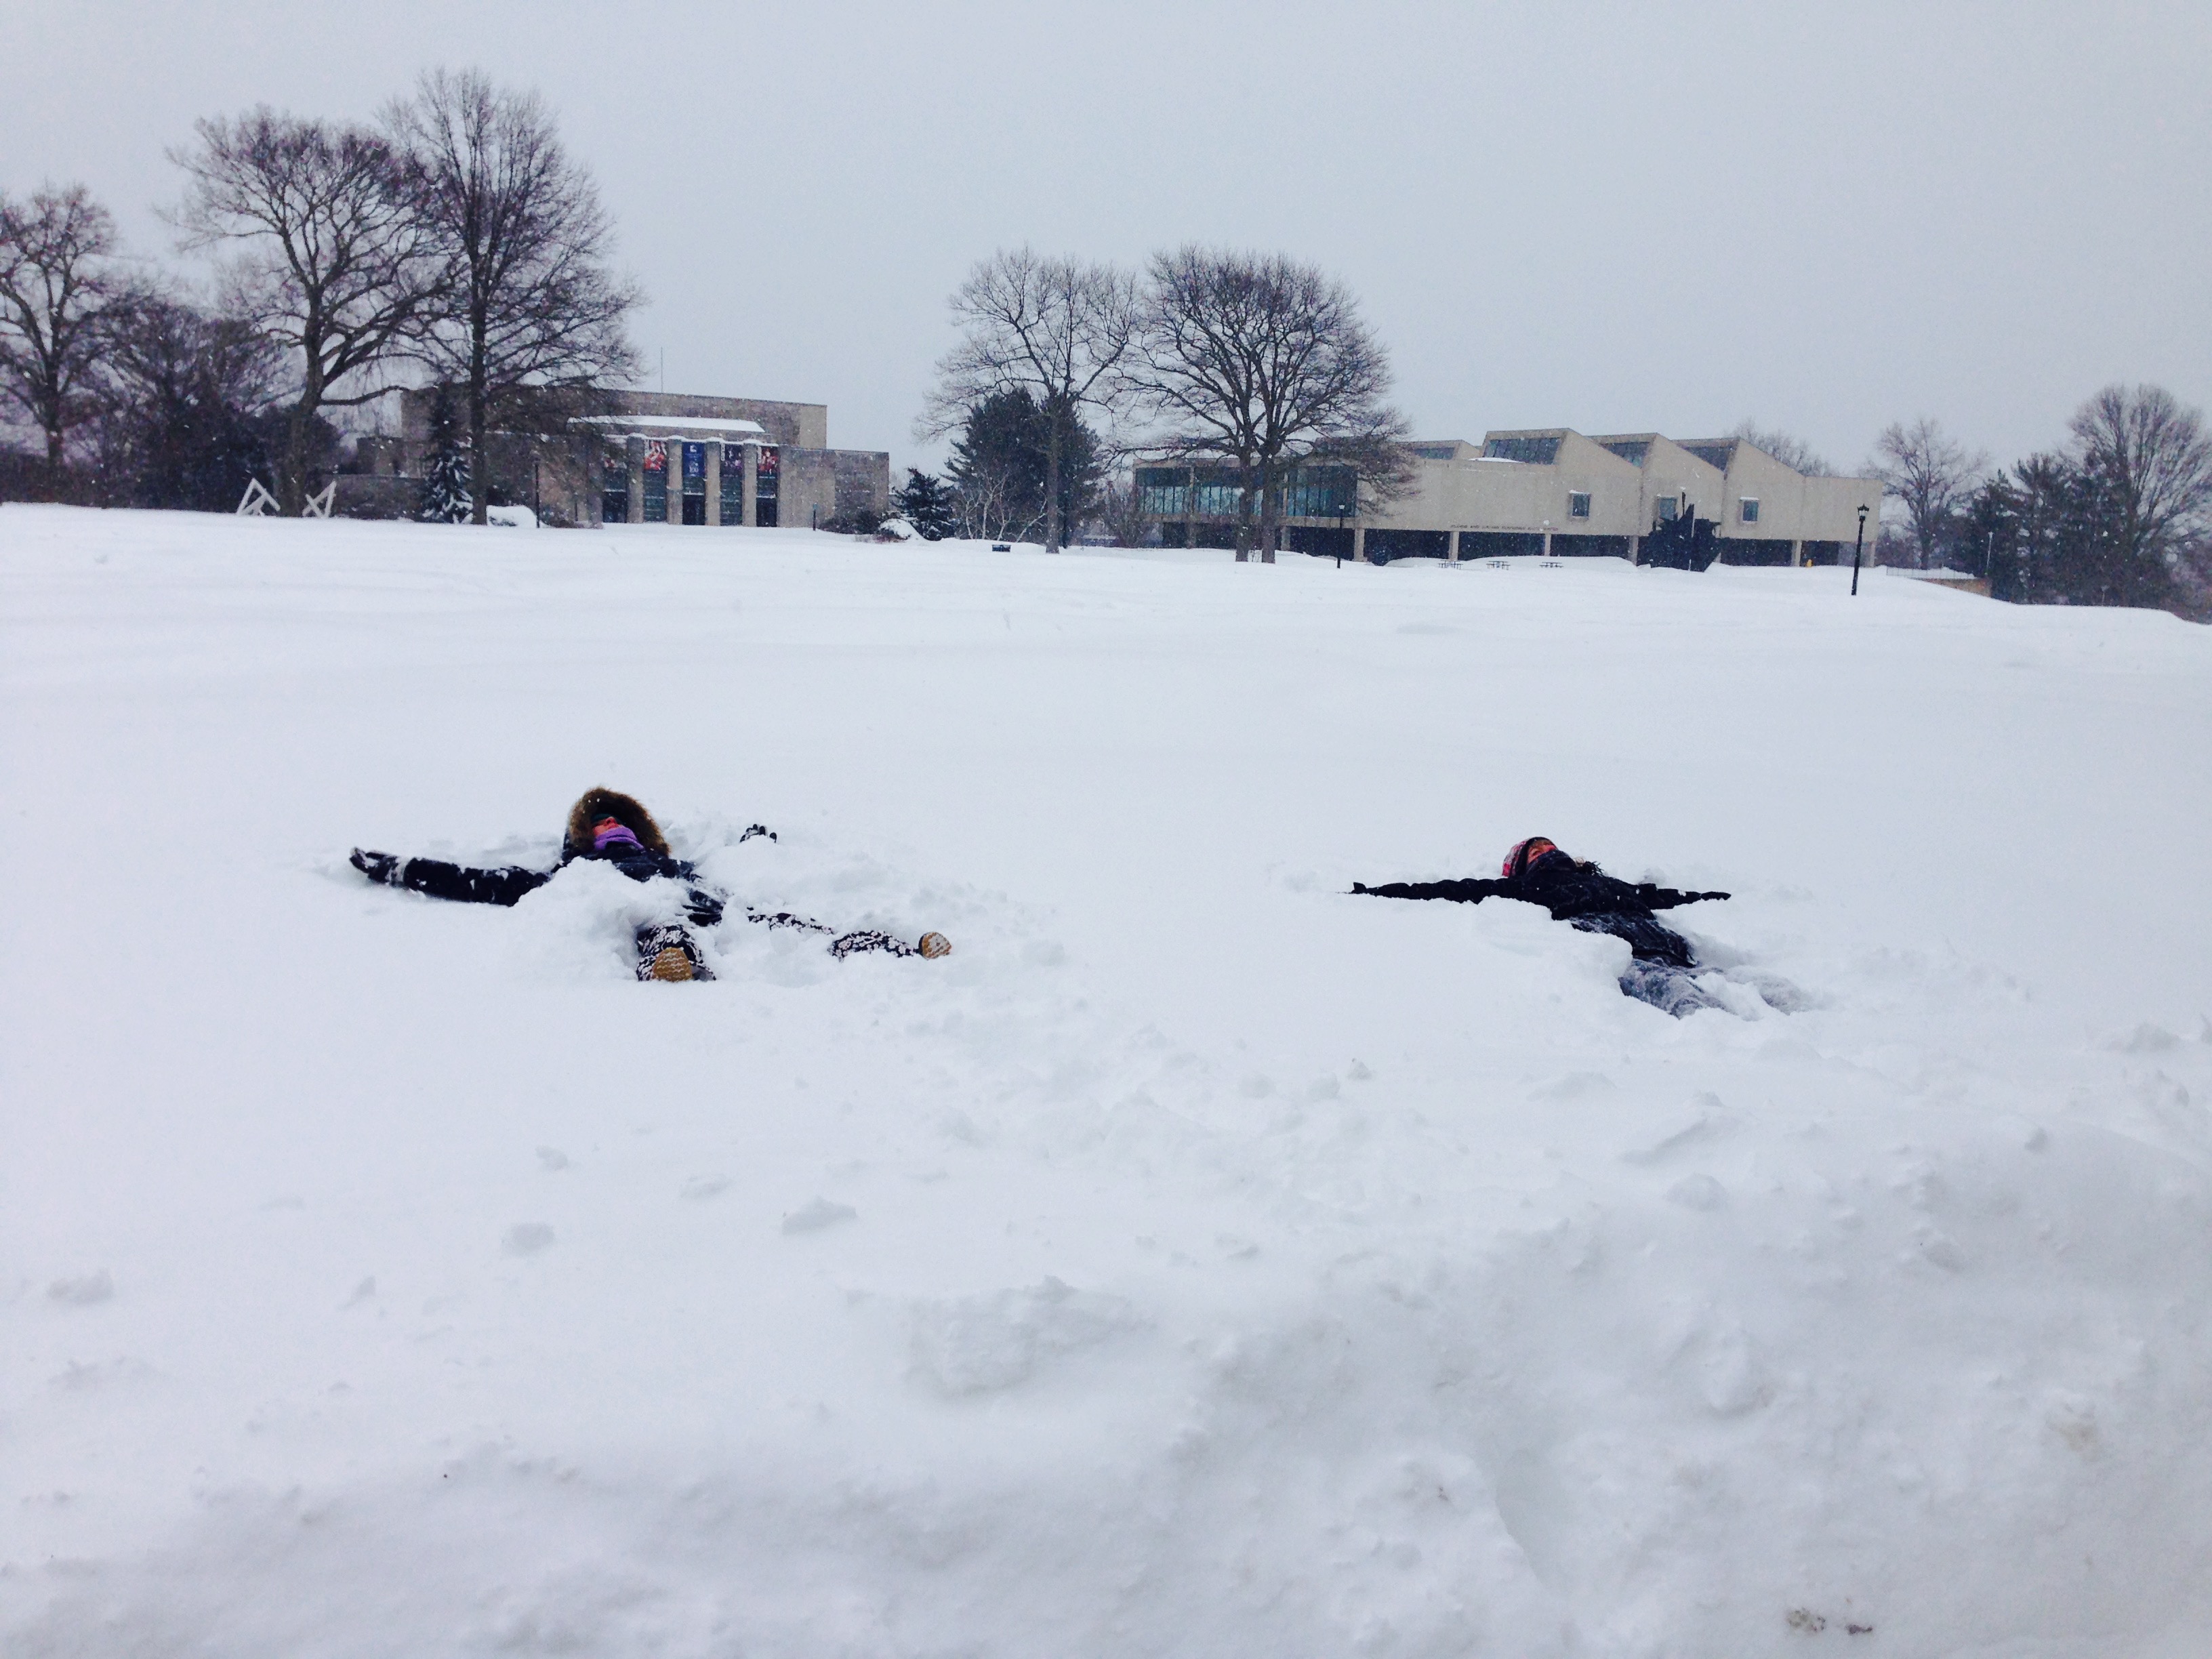 Snow angels in a blizzard